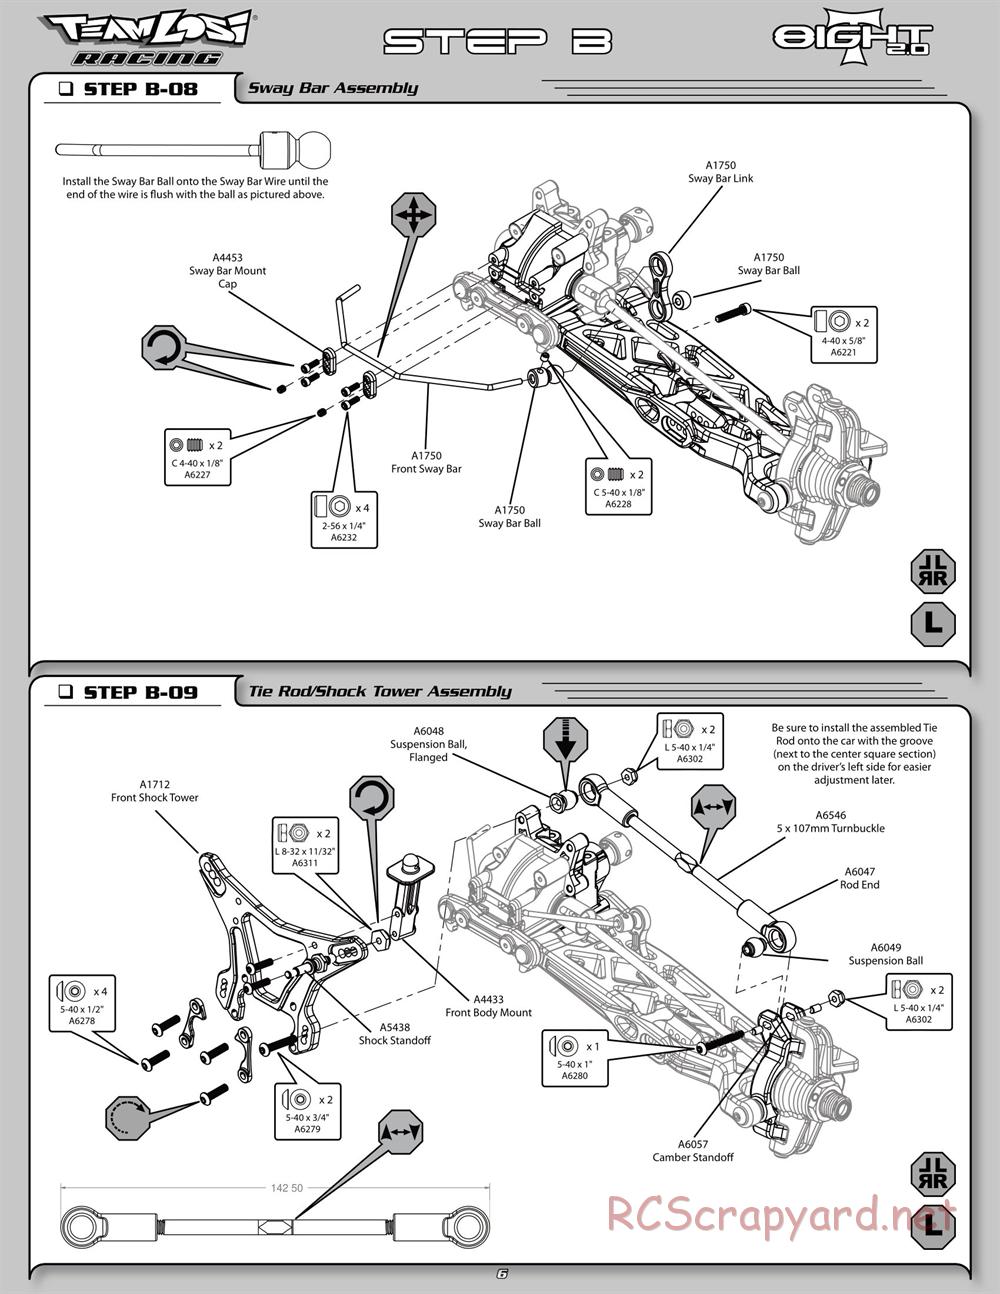 Team Losi - 8ight-T 2.0 Race Roller - Manual - Page 11